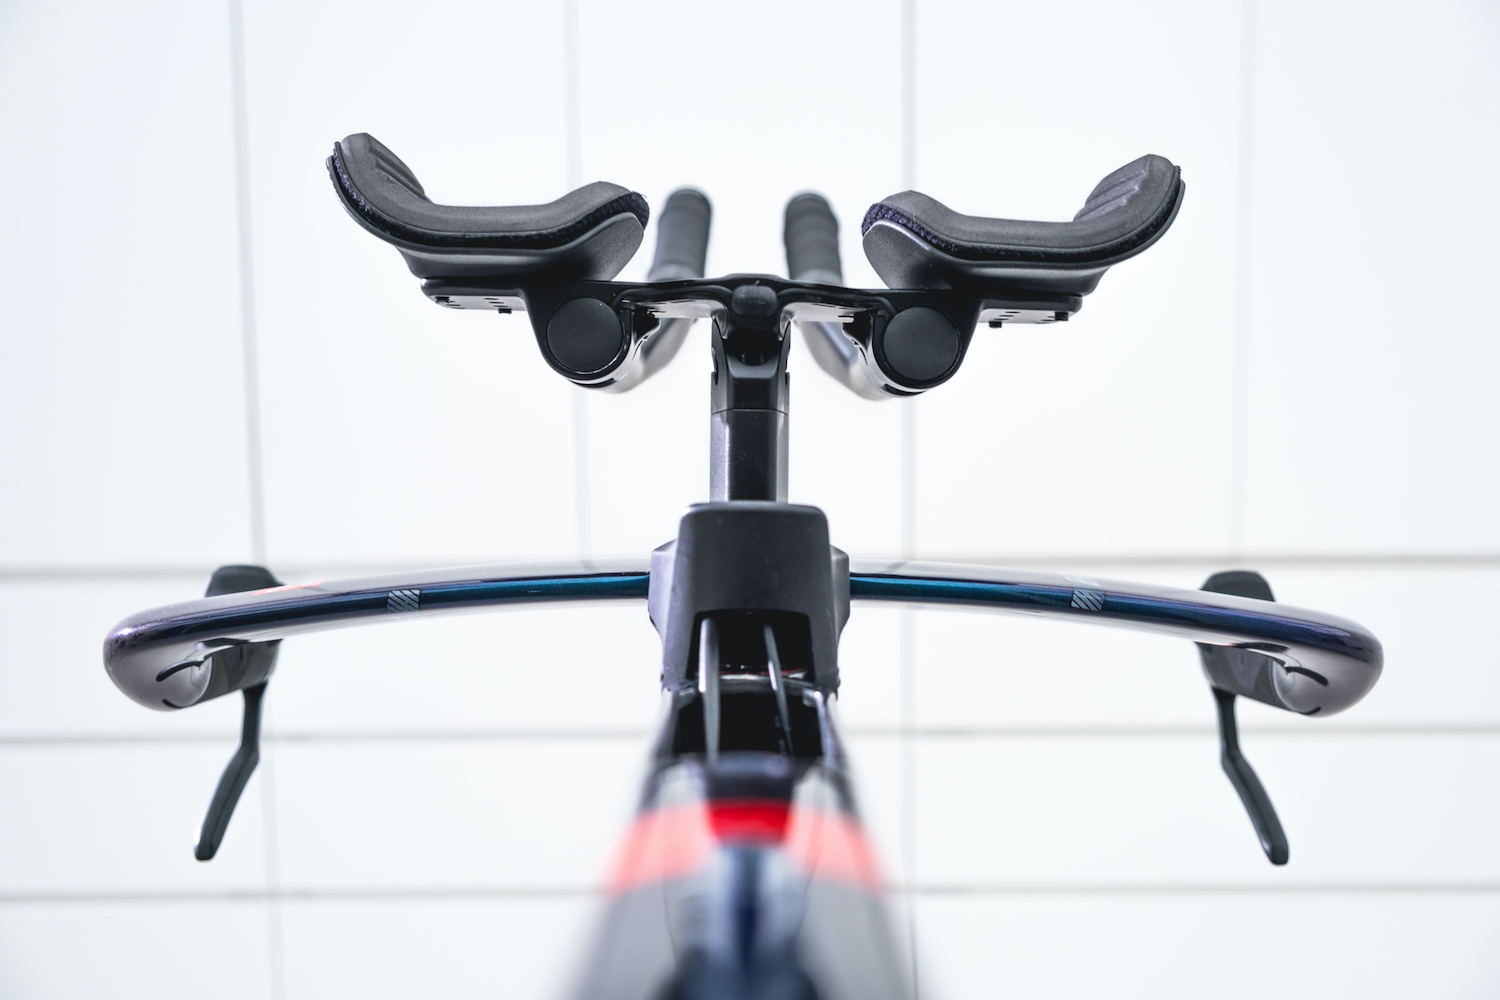 A close up of the cockpit on the Argon 18 E119 Tri+ Disc bike